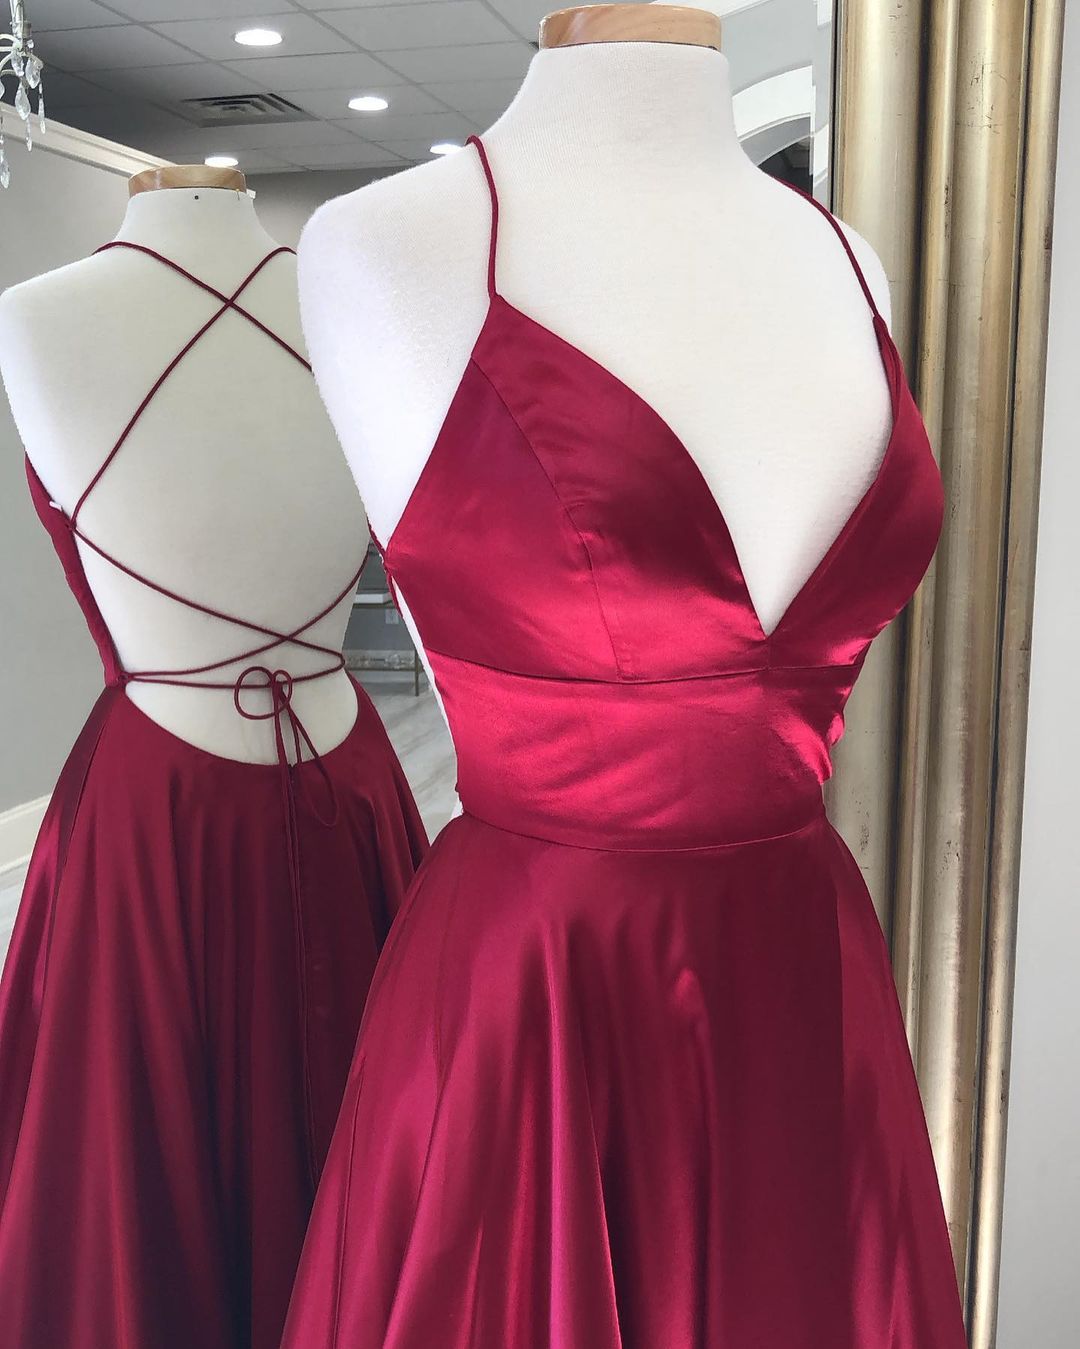 Sexy V Neck Satin Evening Dresses Spaghetti Strap Side Slit Prom Homecoming High Waist Formal Party Gowns Robe de soiree 2022